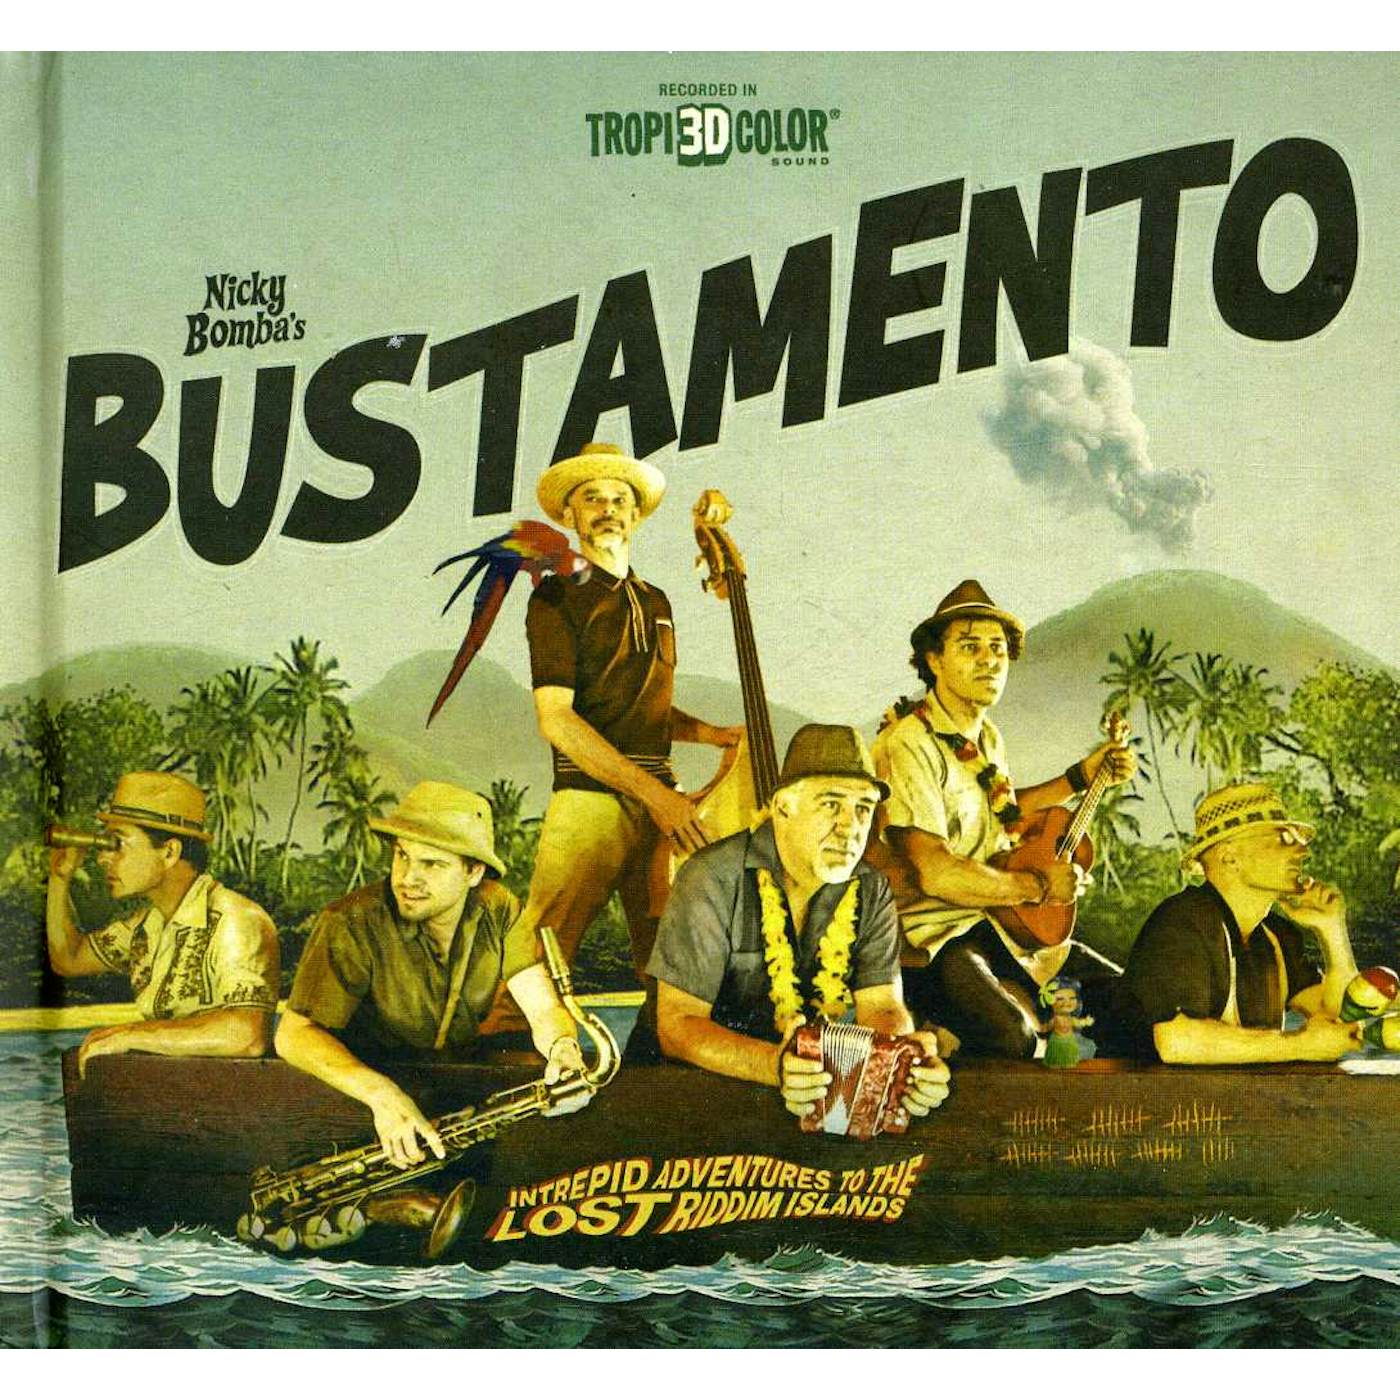 Bustamento INTREPID ADVENTURES TO THE LOST RIDDIMISLANDS CD